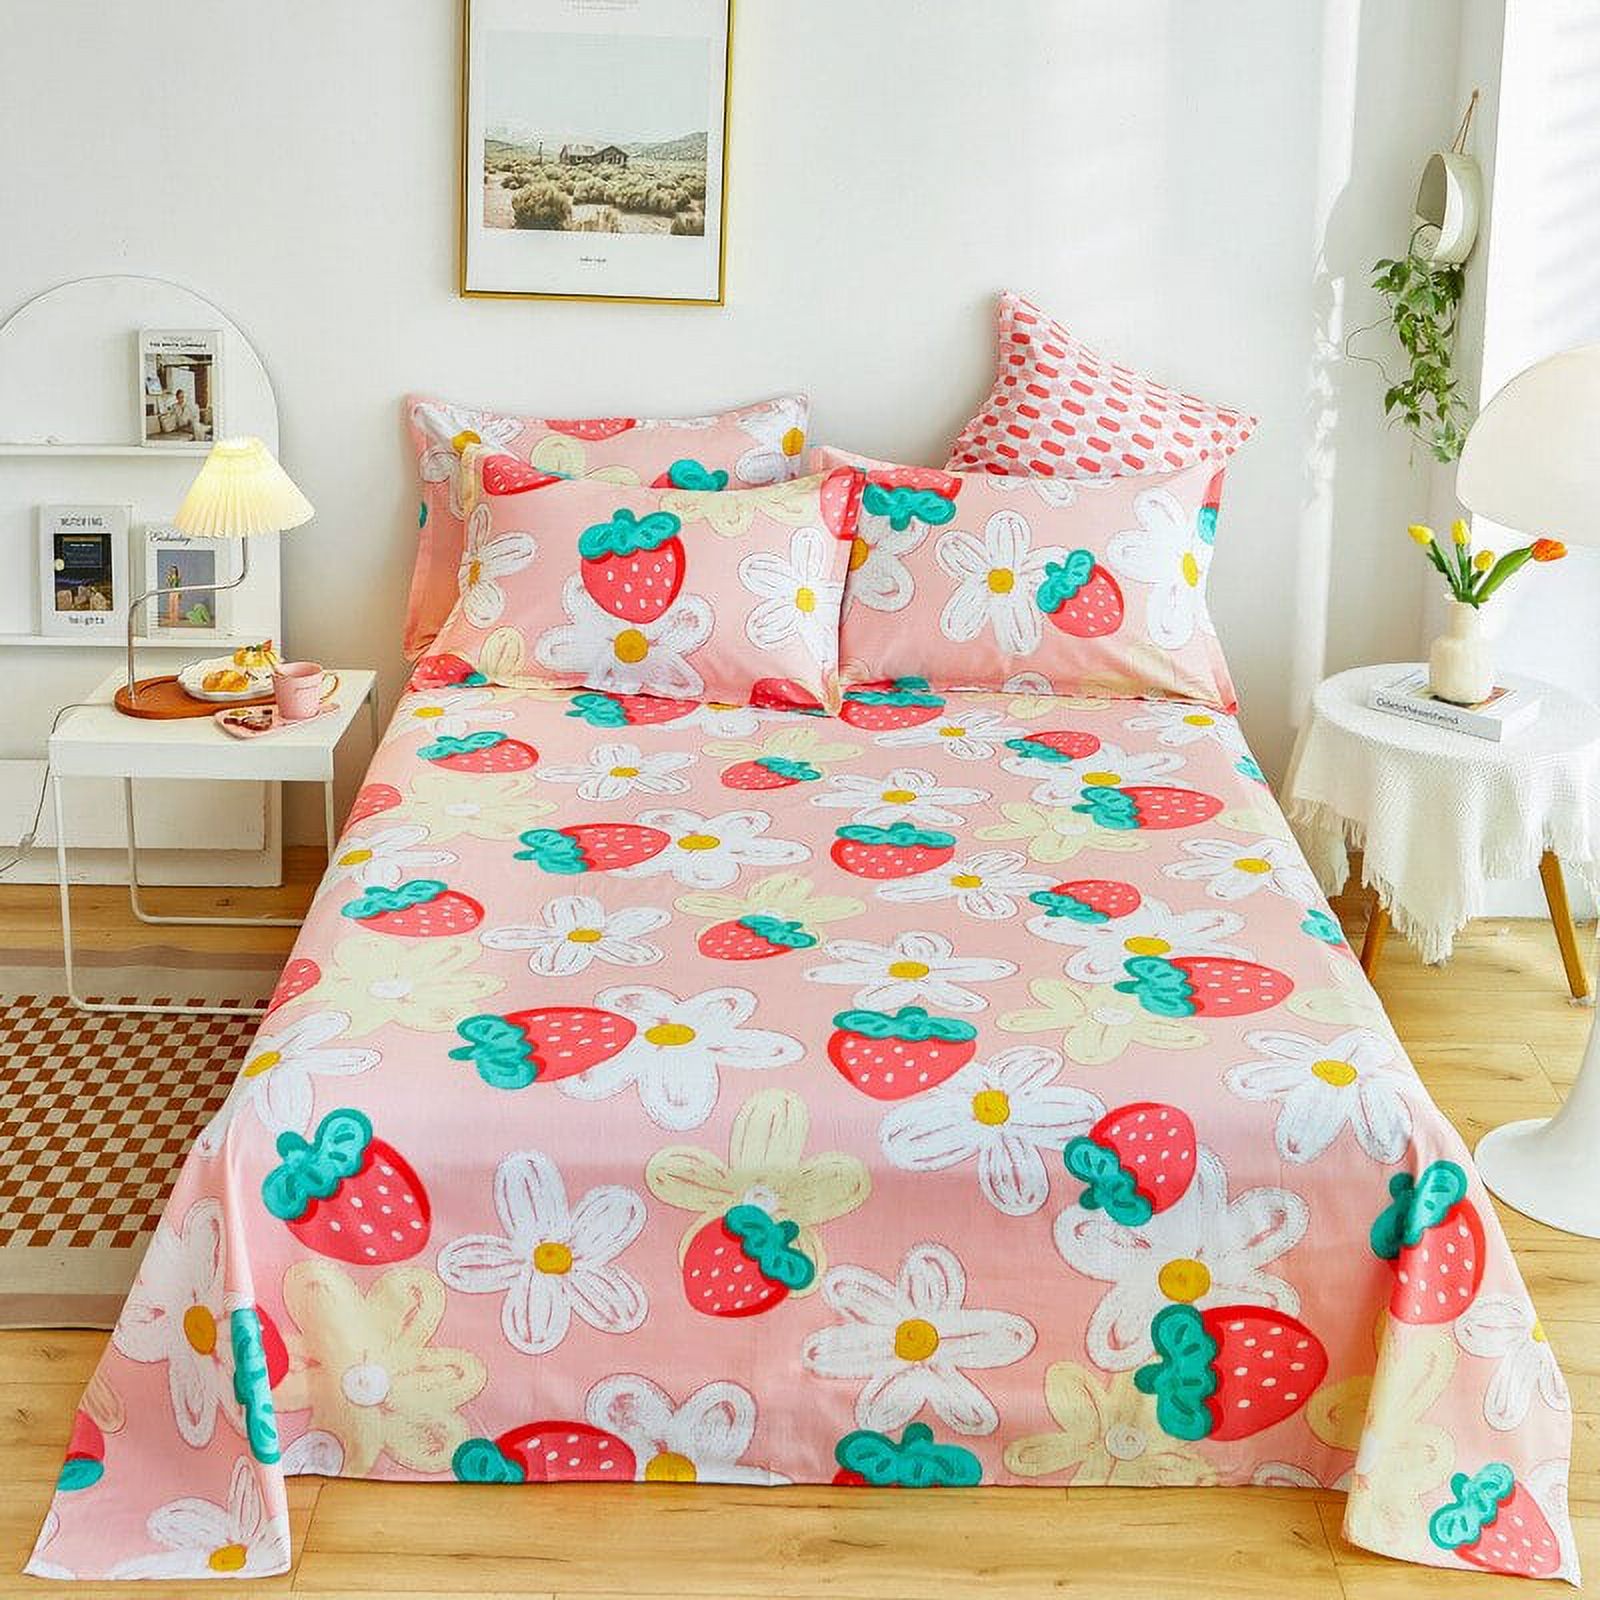 ACMDL Pure Cotton Flat Sheets for Bed Soft Skin-friendly Cartoon Print ...